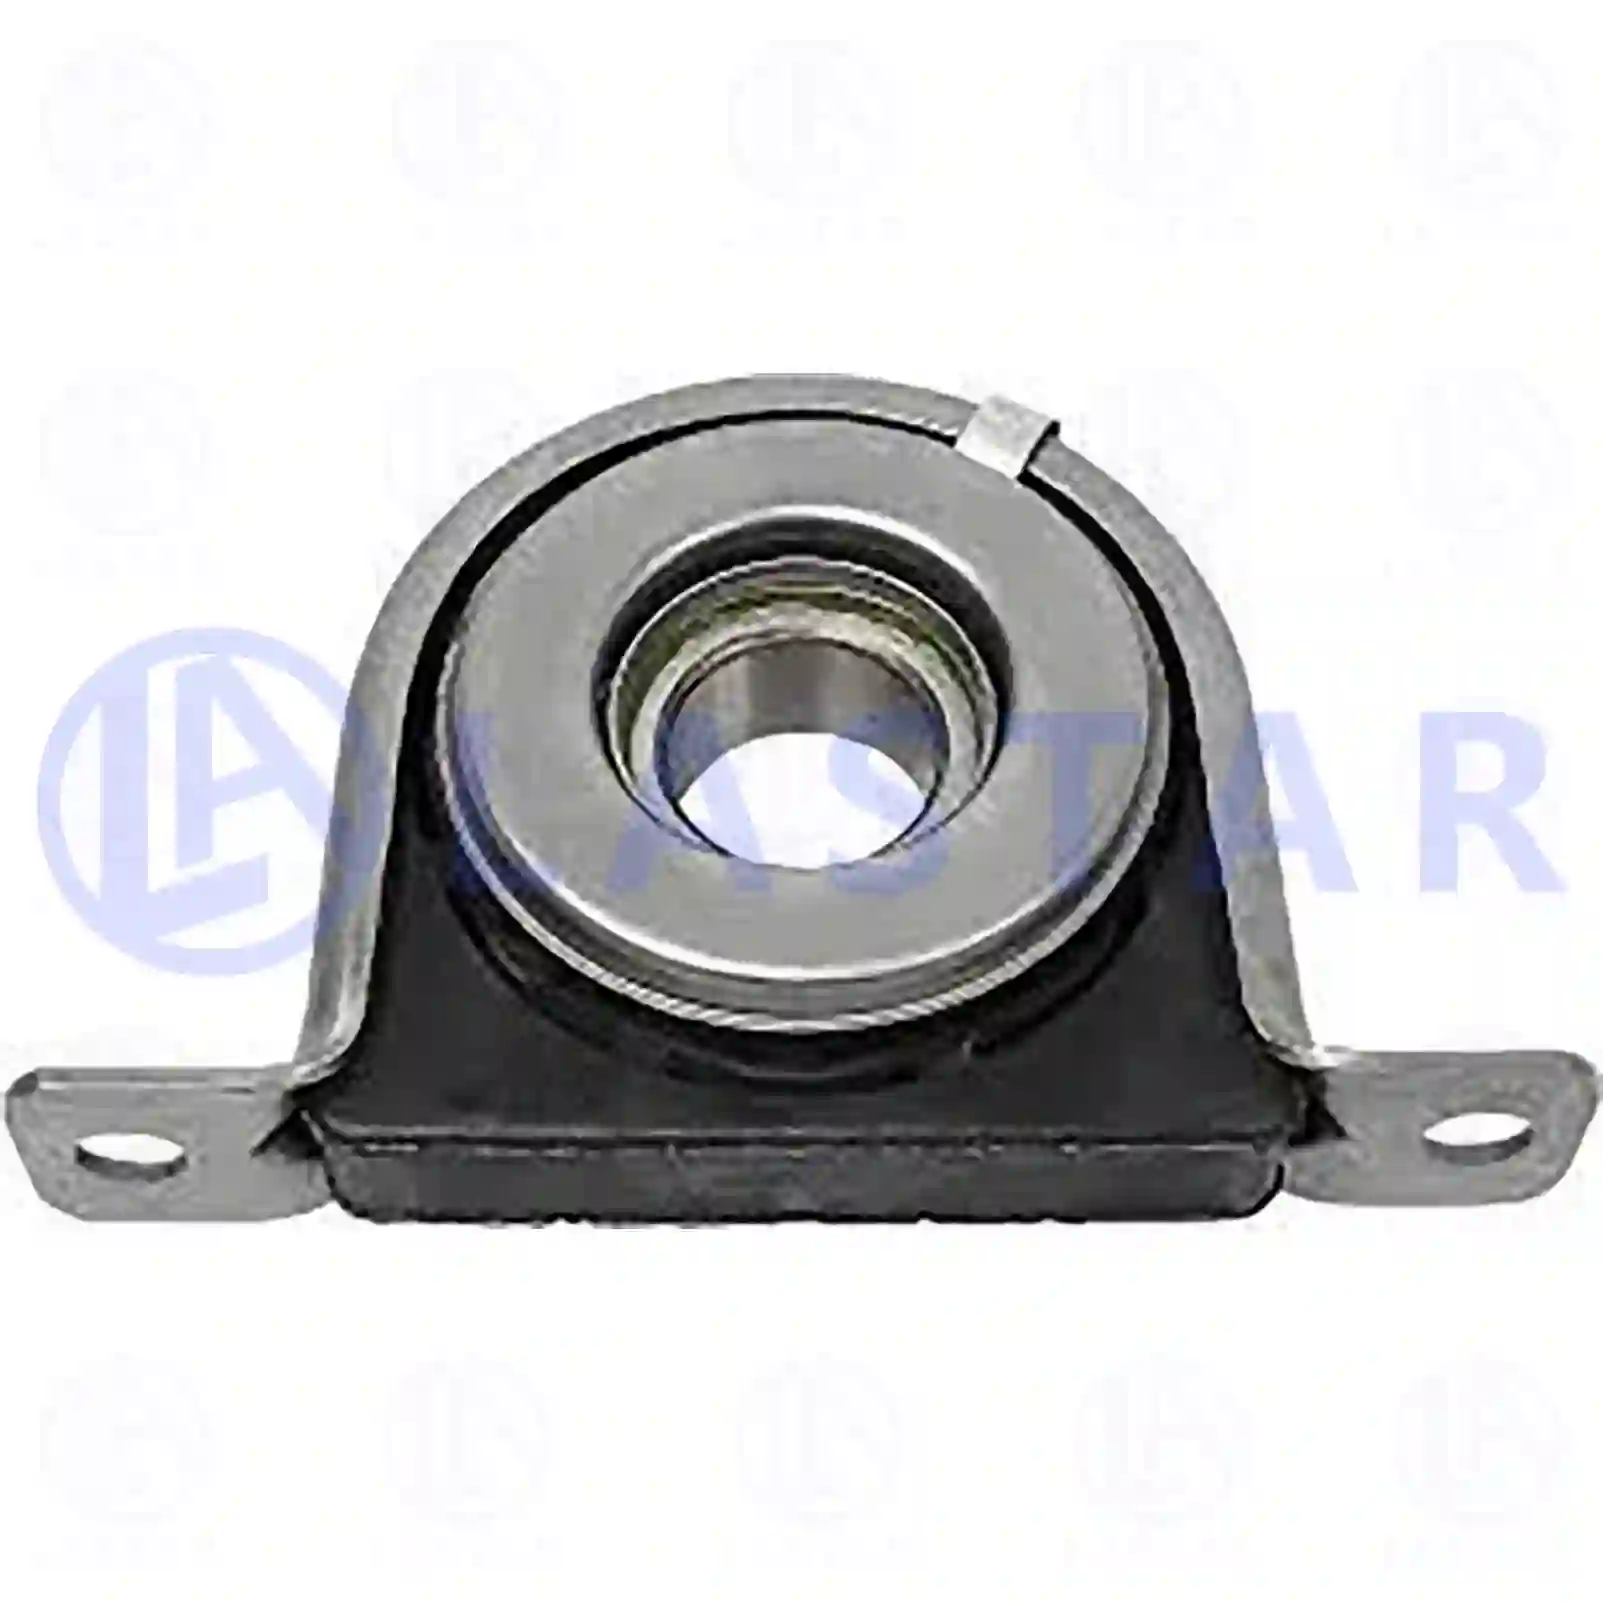 Support Bearing Center bearing, la no: 77734359 ,  oem no:93163376 Lastar Spare Part | Truck Spare Parts, Auotomotive Spare Parts